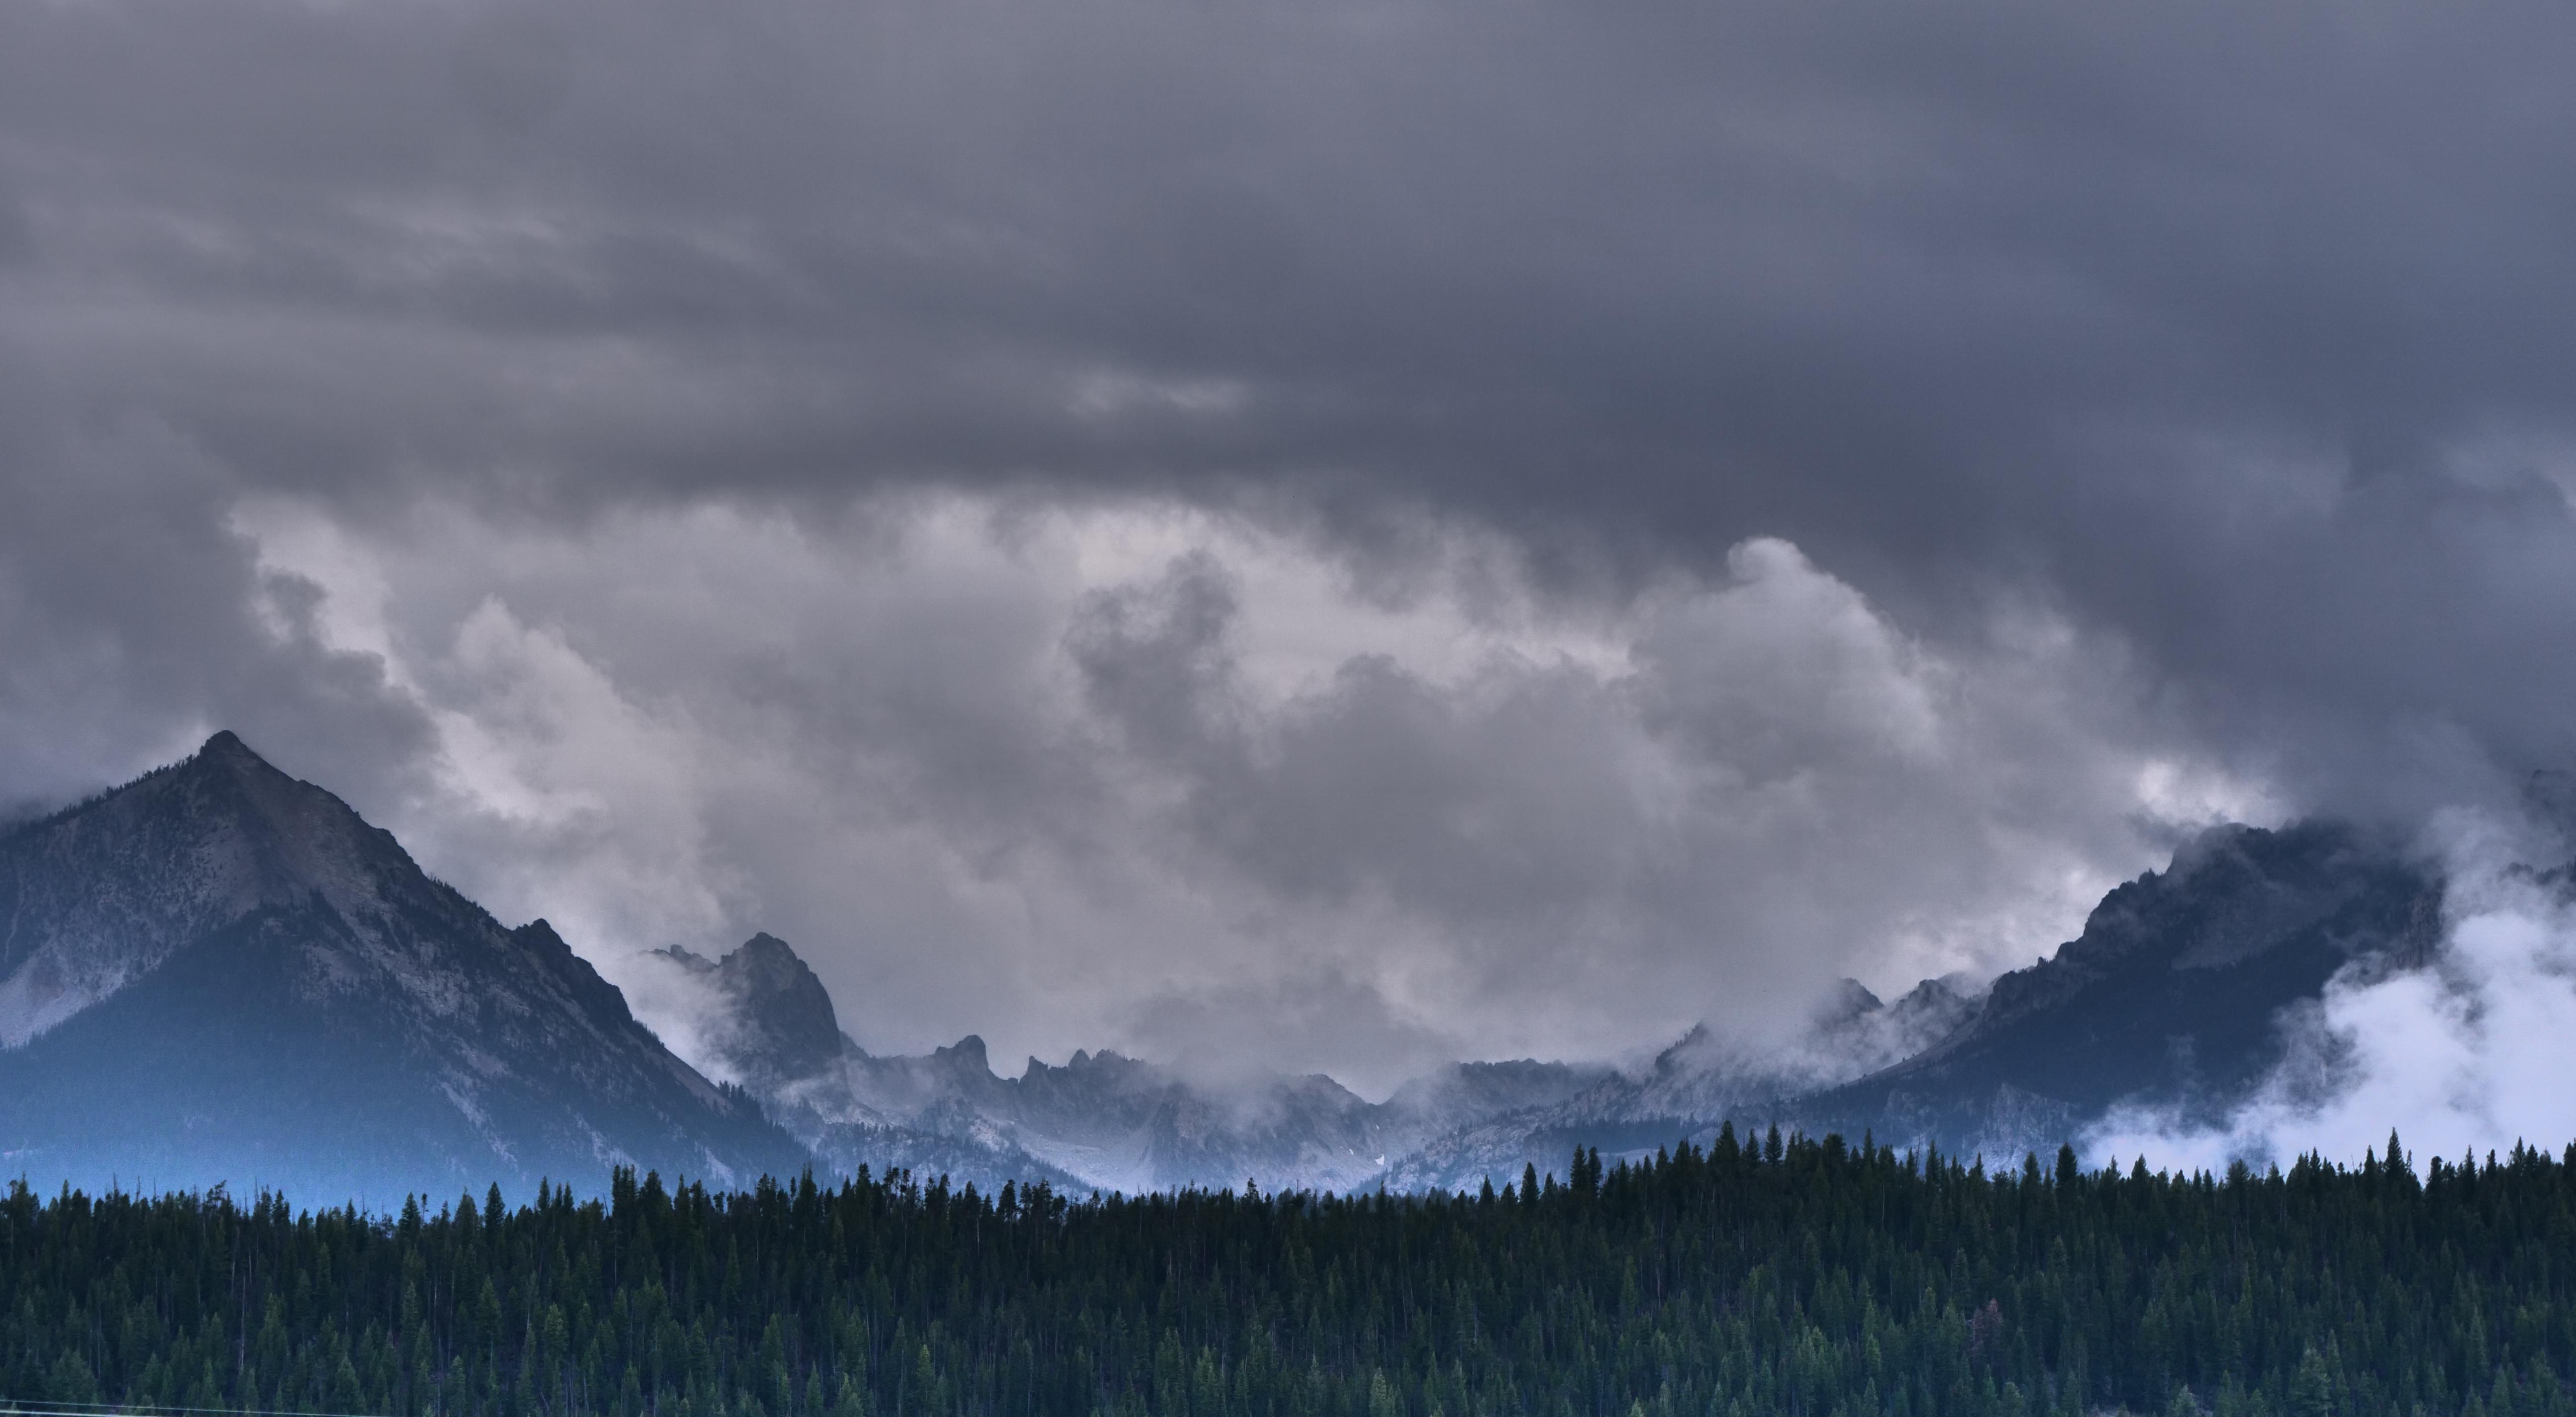 Rugged mountains are seen, with clouds and mist swirling around the peaks.